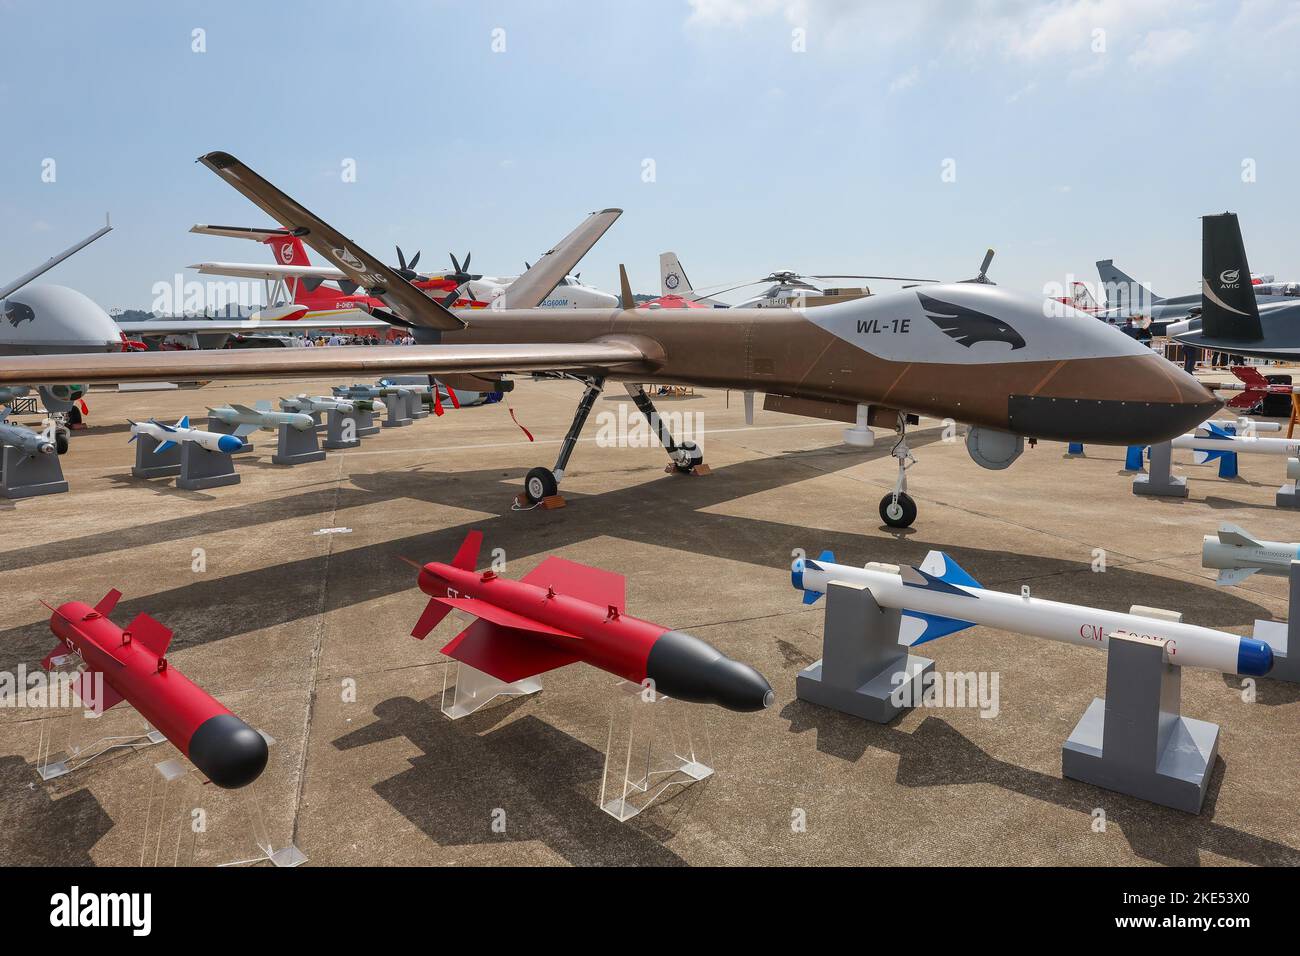 Zhuhai. 9th Nov, 2022. This photo taken on Nov. 9, 2022 shows a WL-1E unmanned aerial vehicle (UAV) displayed at the 14th China International Aviation and Aerospace Exhibition, also known as Airshow China, in the port city of Zhuhai, south China's Guangdong Province. A range of China's homegrown unmanned aerial vehicles (UAVs) and anti-drone system are showcased at the 14th Airshow China. Credit: Liu Dawei/Xinhua/Alamy Live News Stock Photo